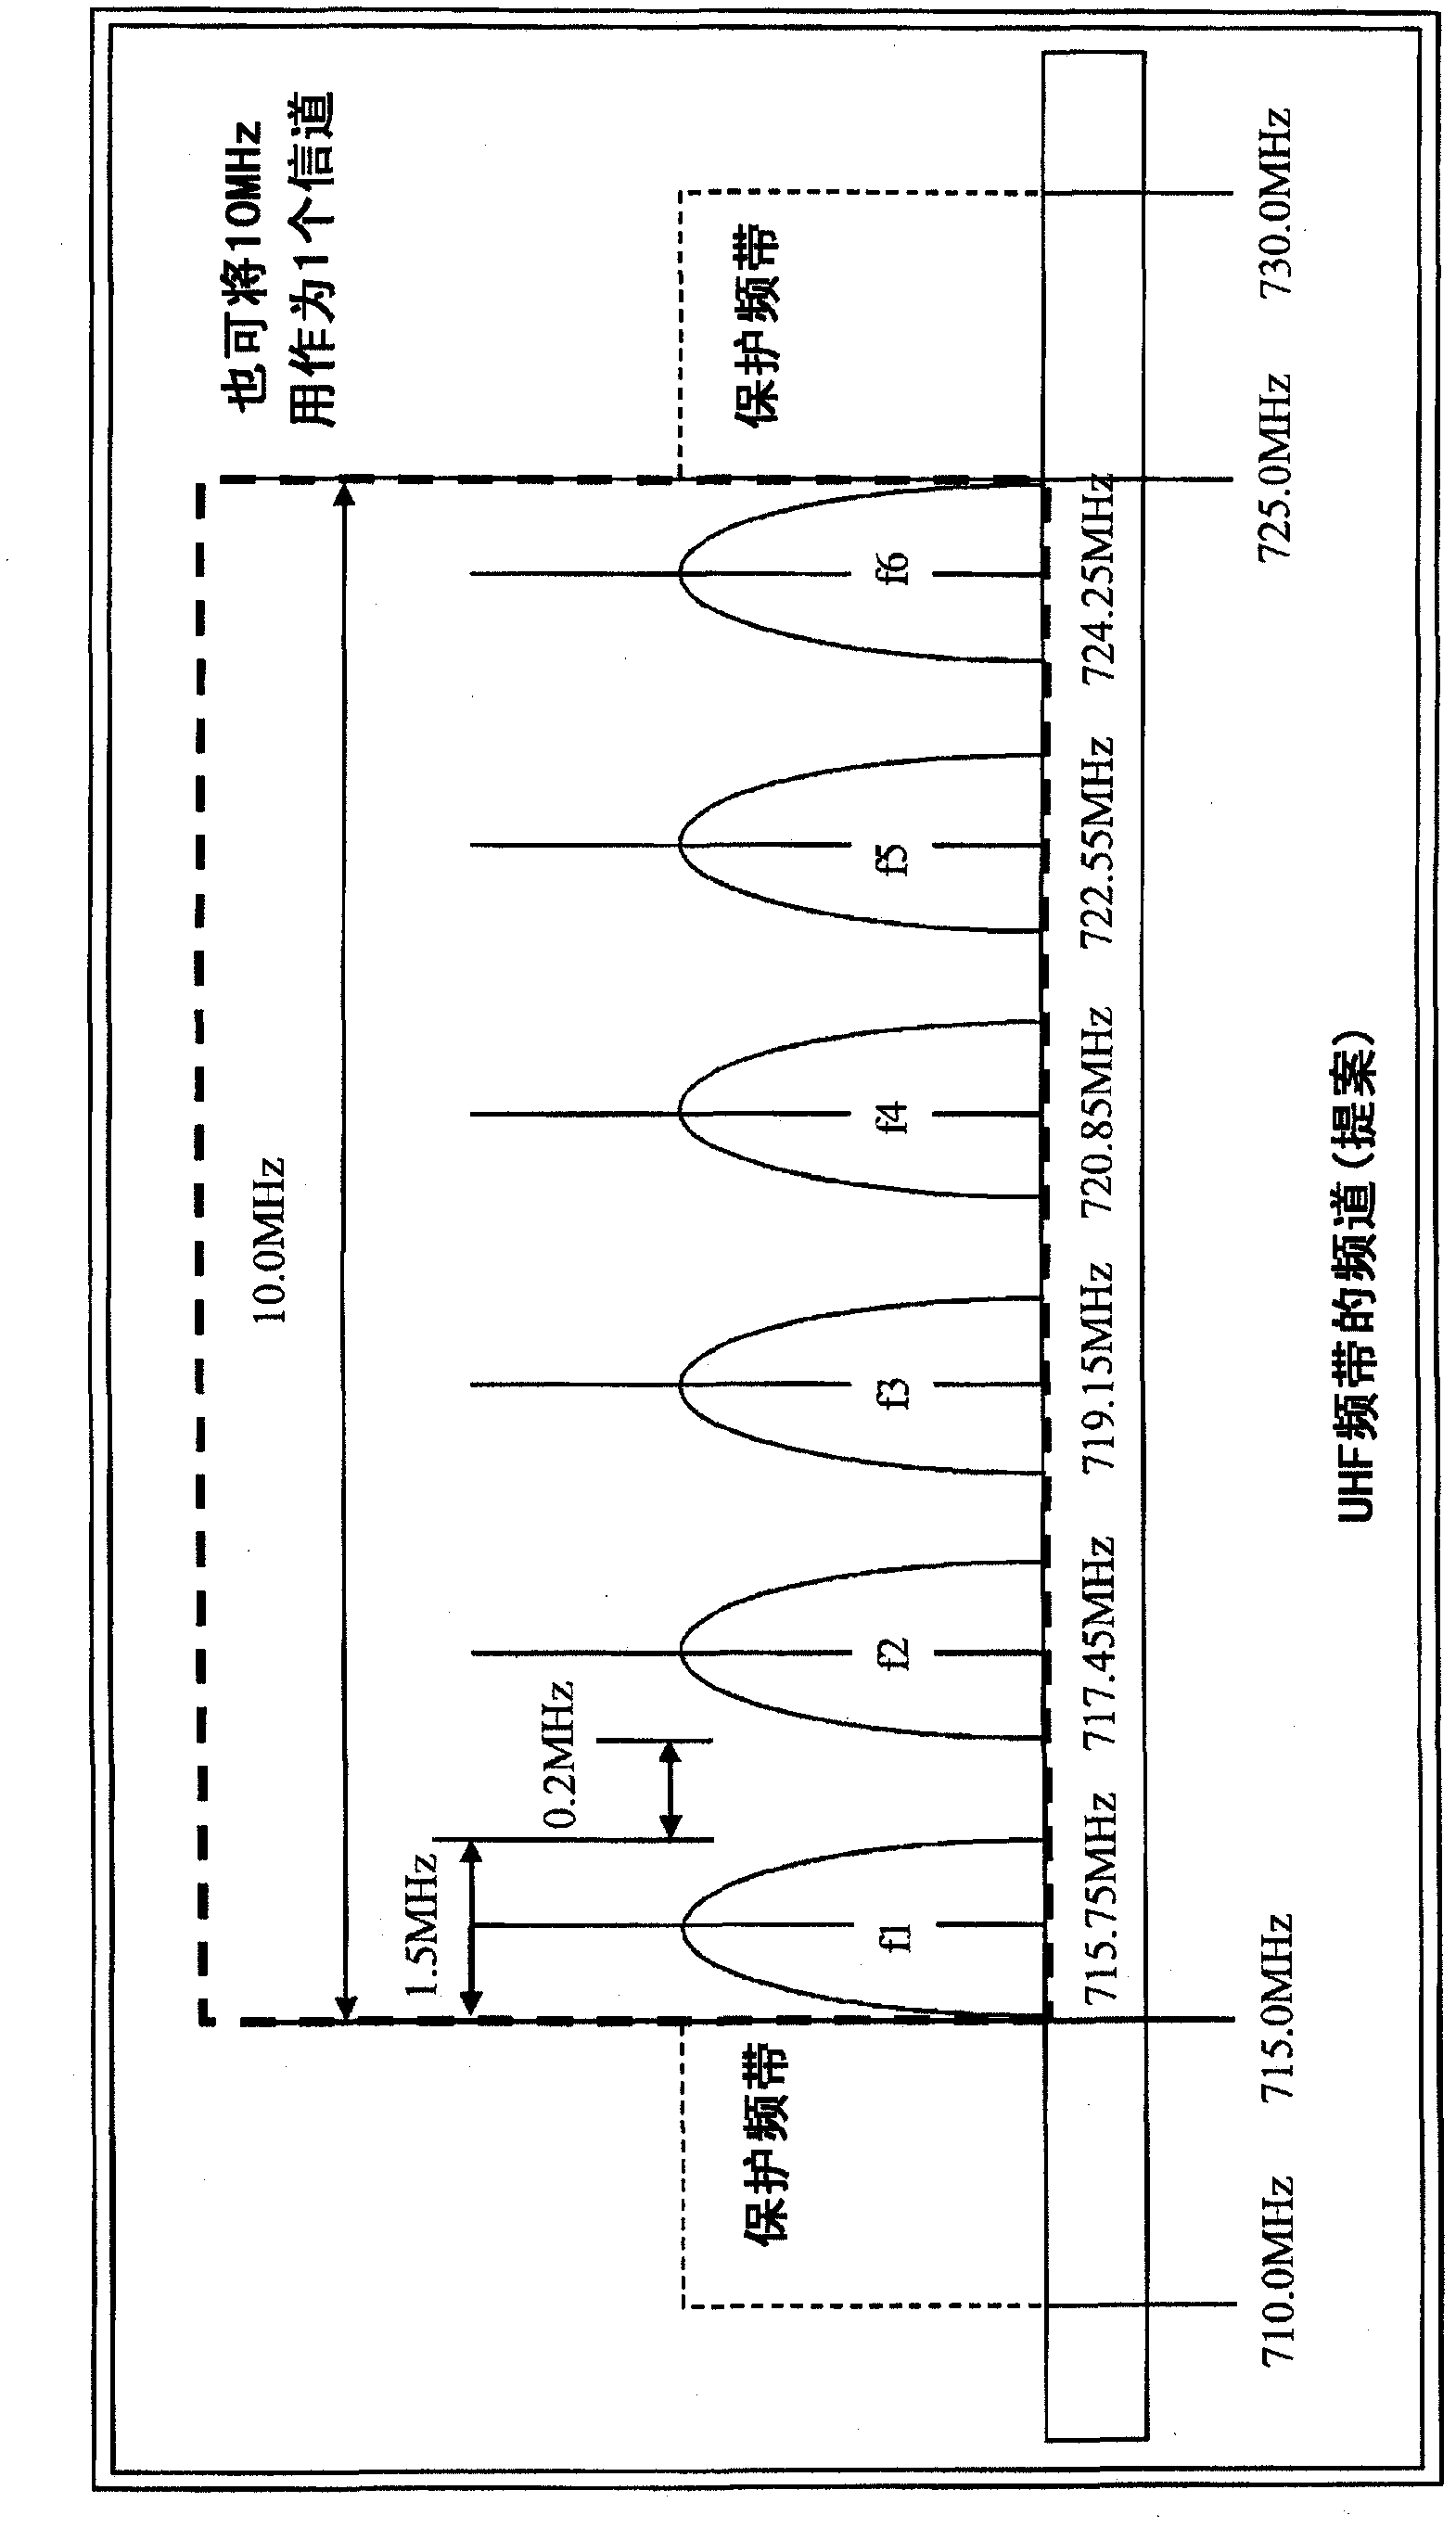 Train-of-vehicle travel support device